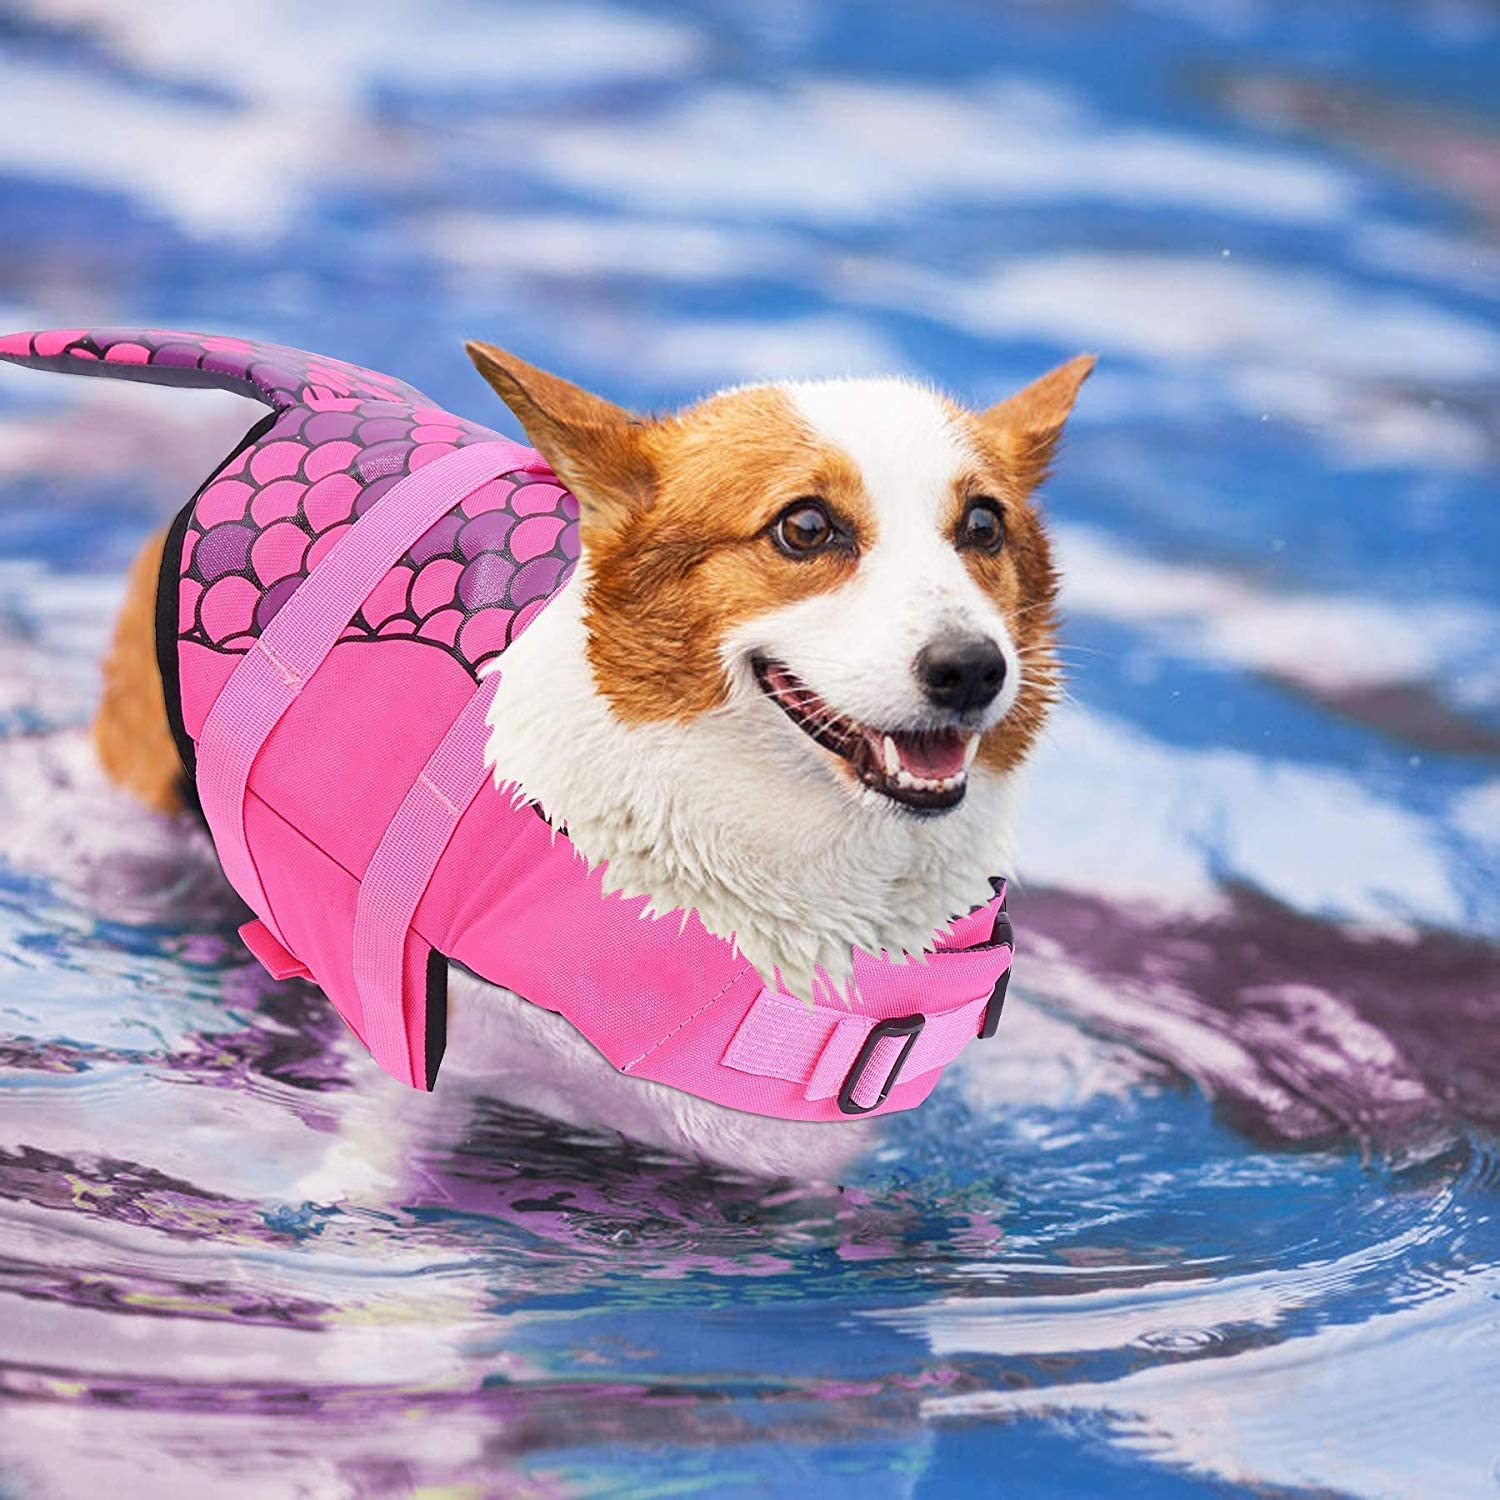 Dog life jackets help to provide water safety for for small, medium and large dog breeds.